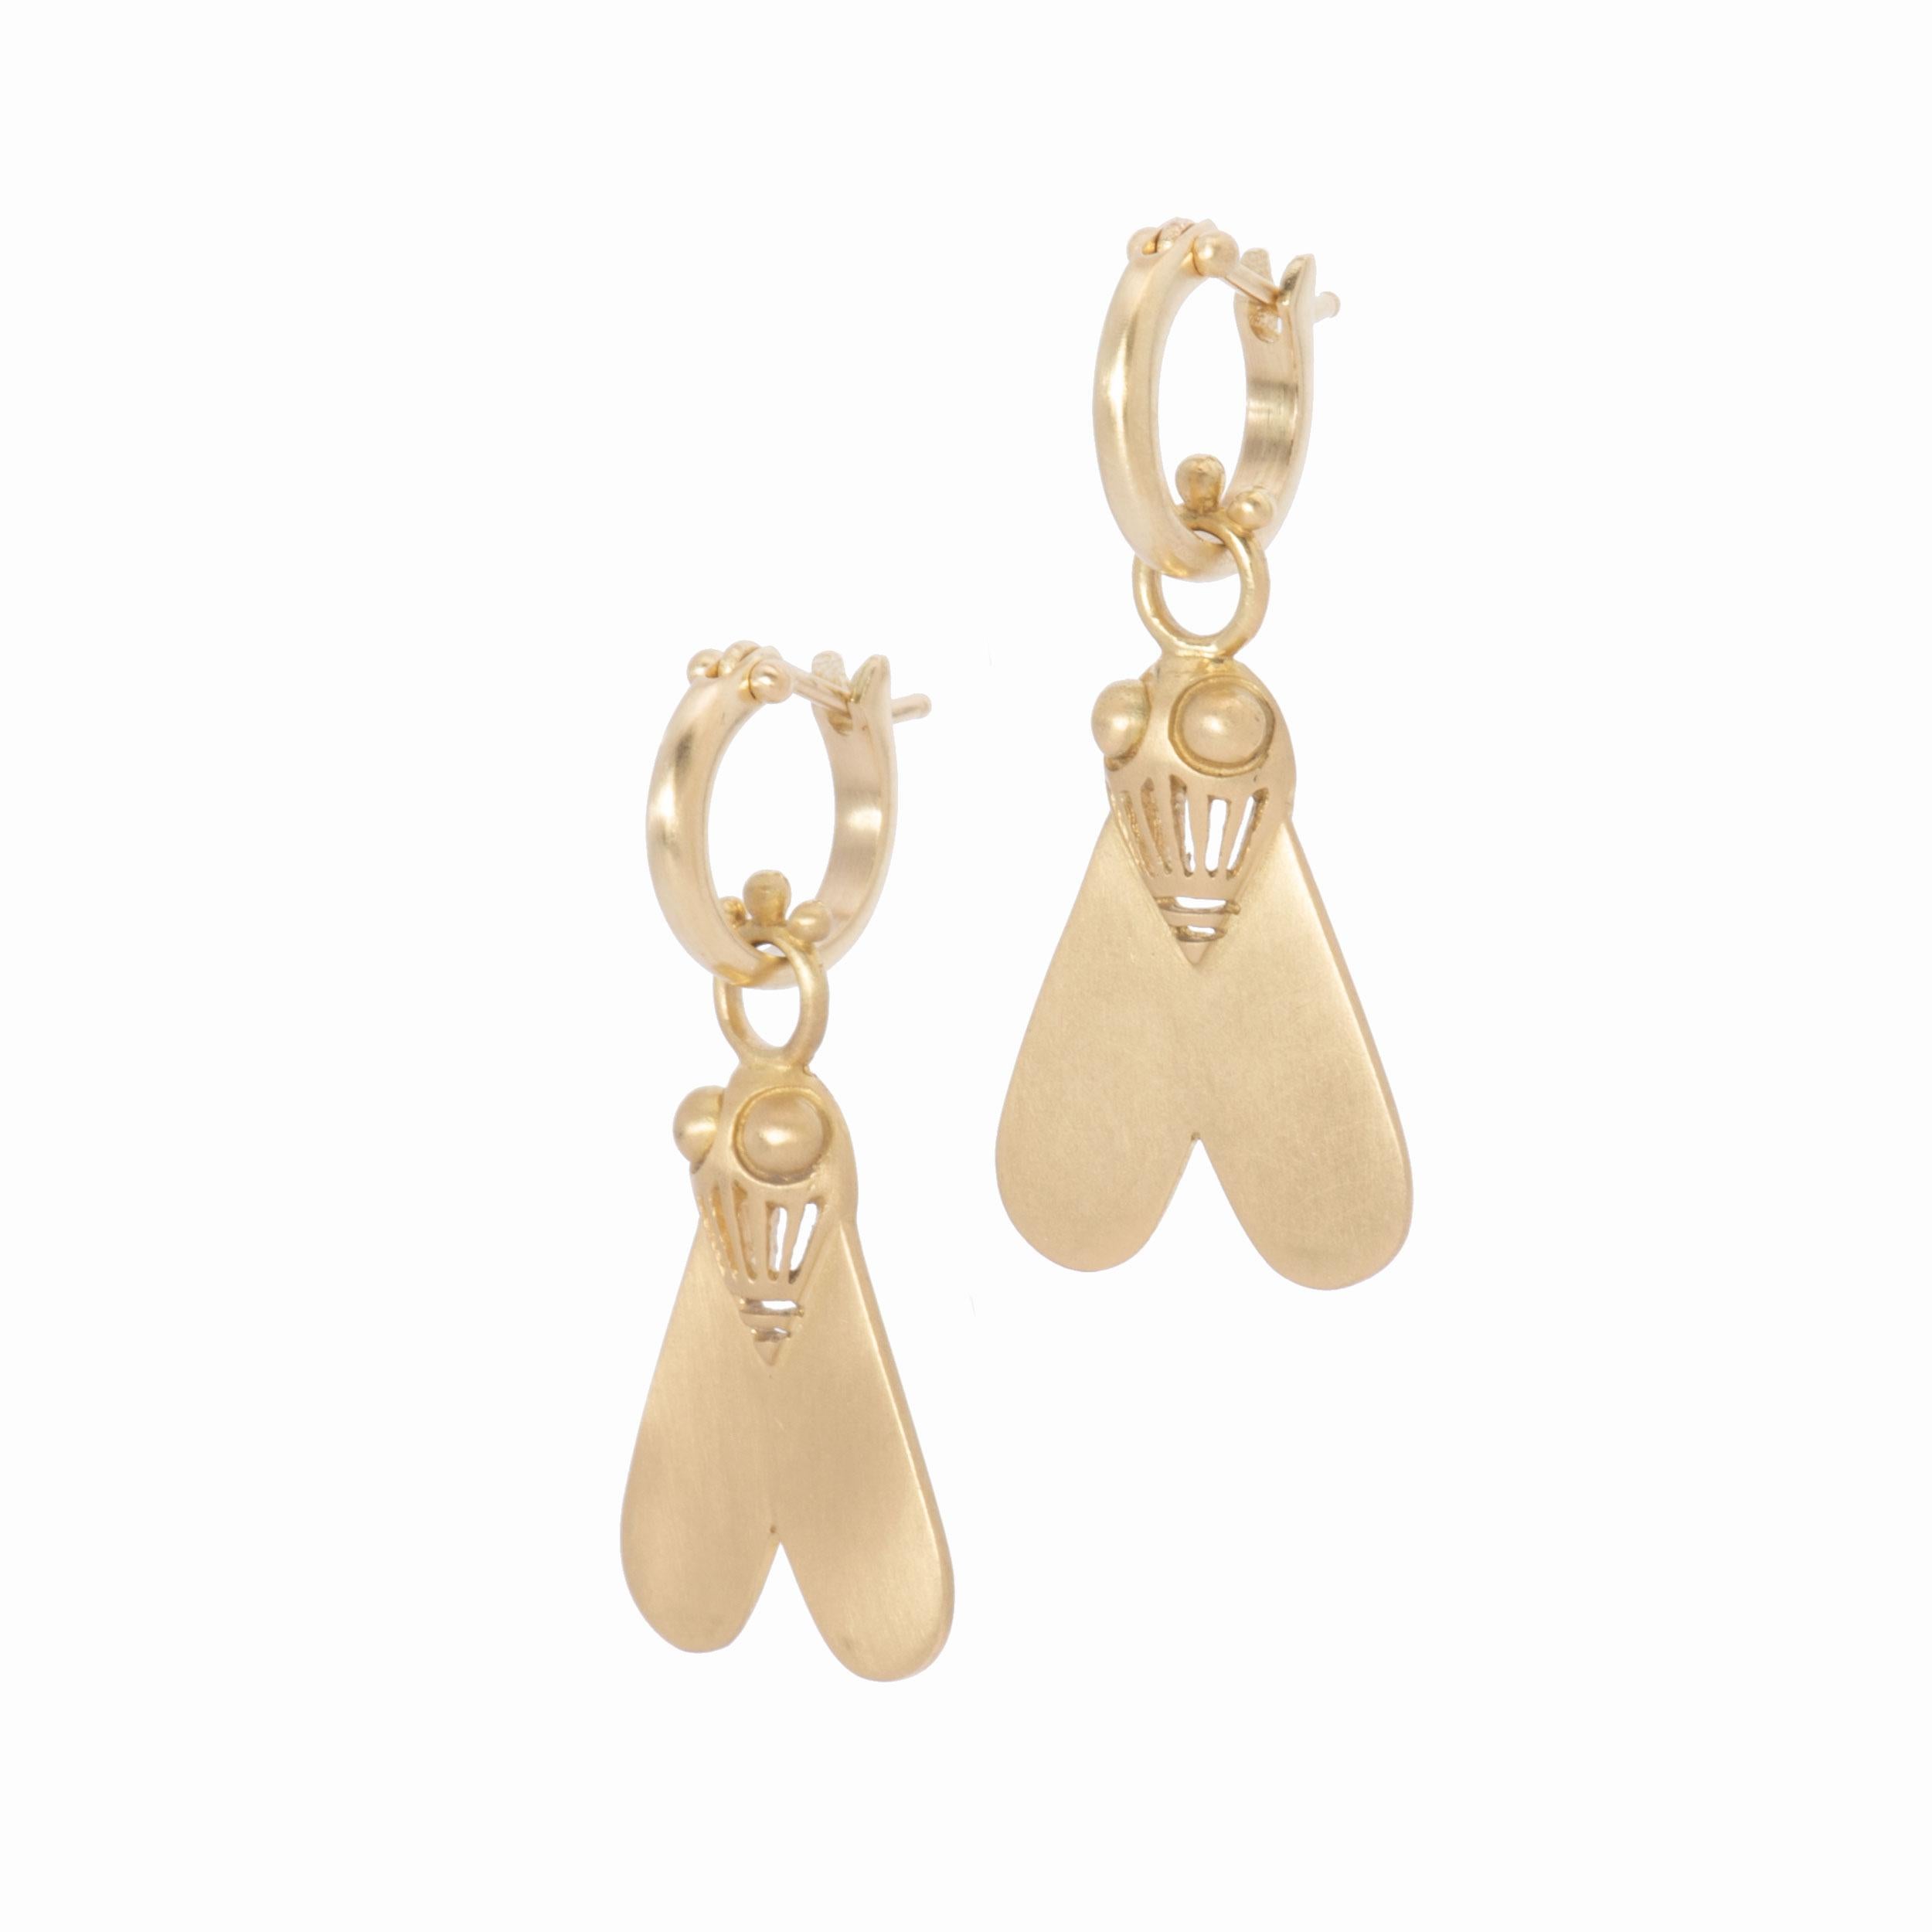 Queen Nefertiti was the first woman to wear this talisman, inspired by an ancient Egyptian amulet that was used to reward bravery. Hand crafted in 18k gold with our signature satin finish, Nefertiti's Fly Drop Earrings are a striking design, both